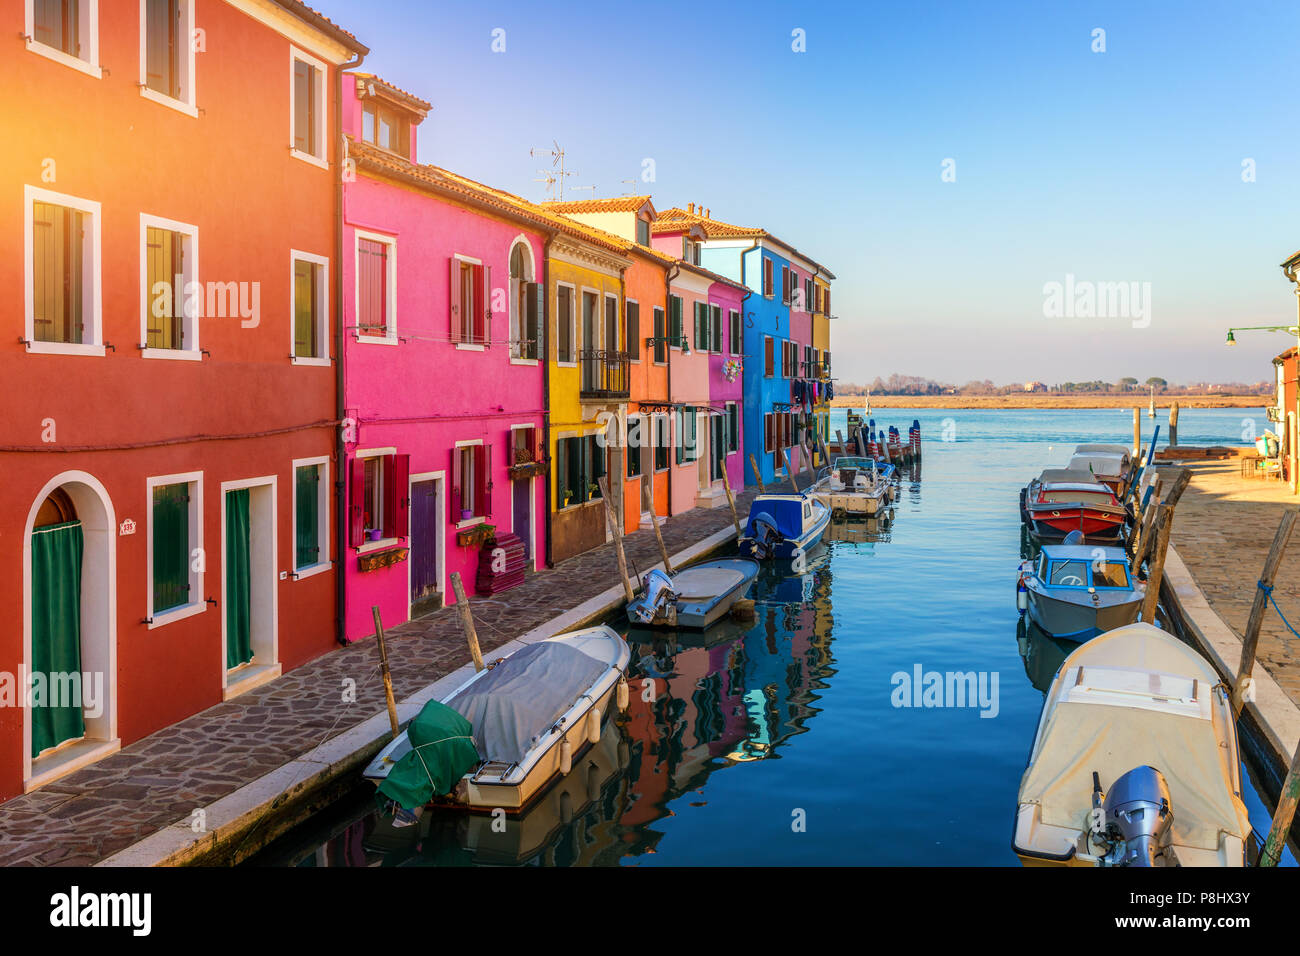 Street with colorful buildings in Burano island, Venice, Italy. Architecture and landmarks of Burano, Venice postcard. Scenic canal and colorful archi Stock Photo